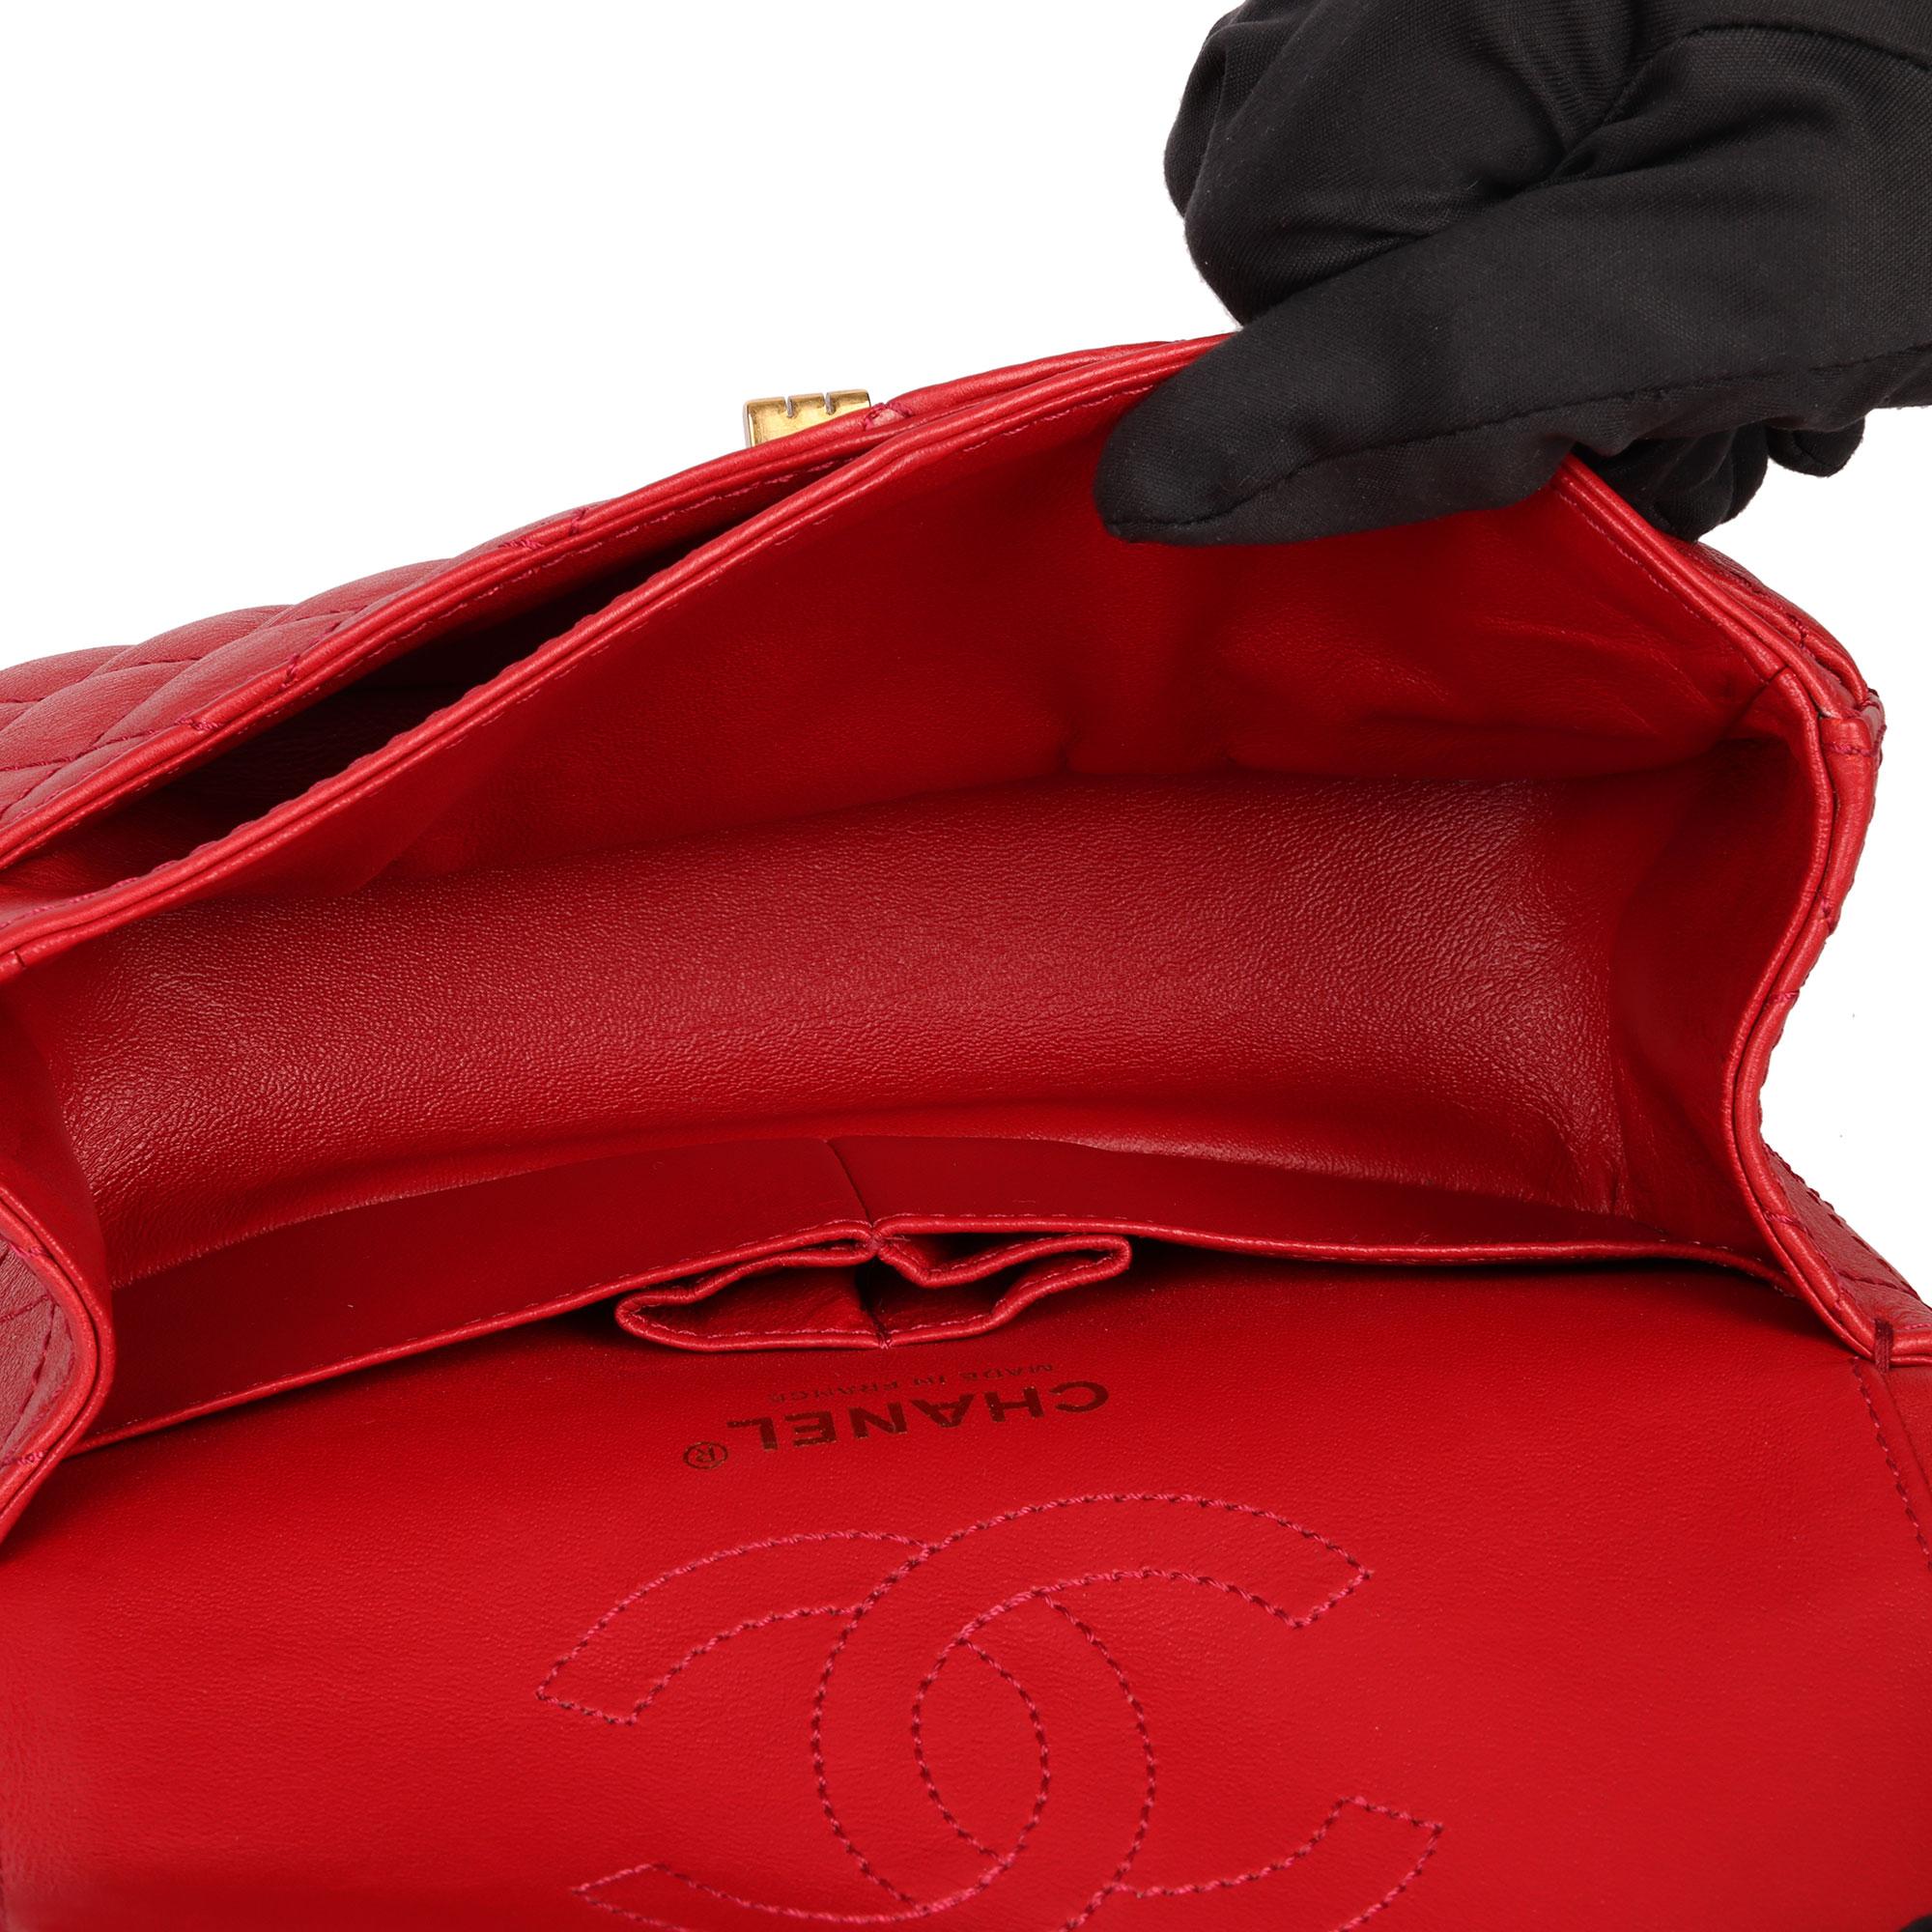 Chanel Red Quilted Calfskin Leather 2.55 Reissue 224 Double Flap Bag 5